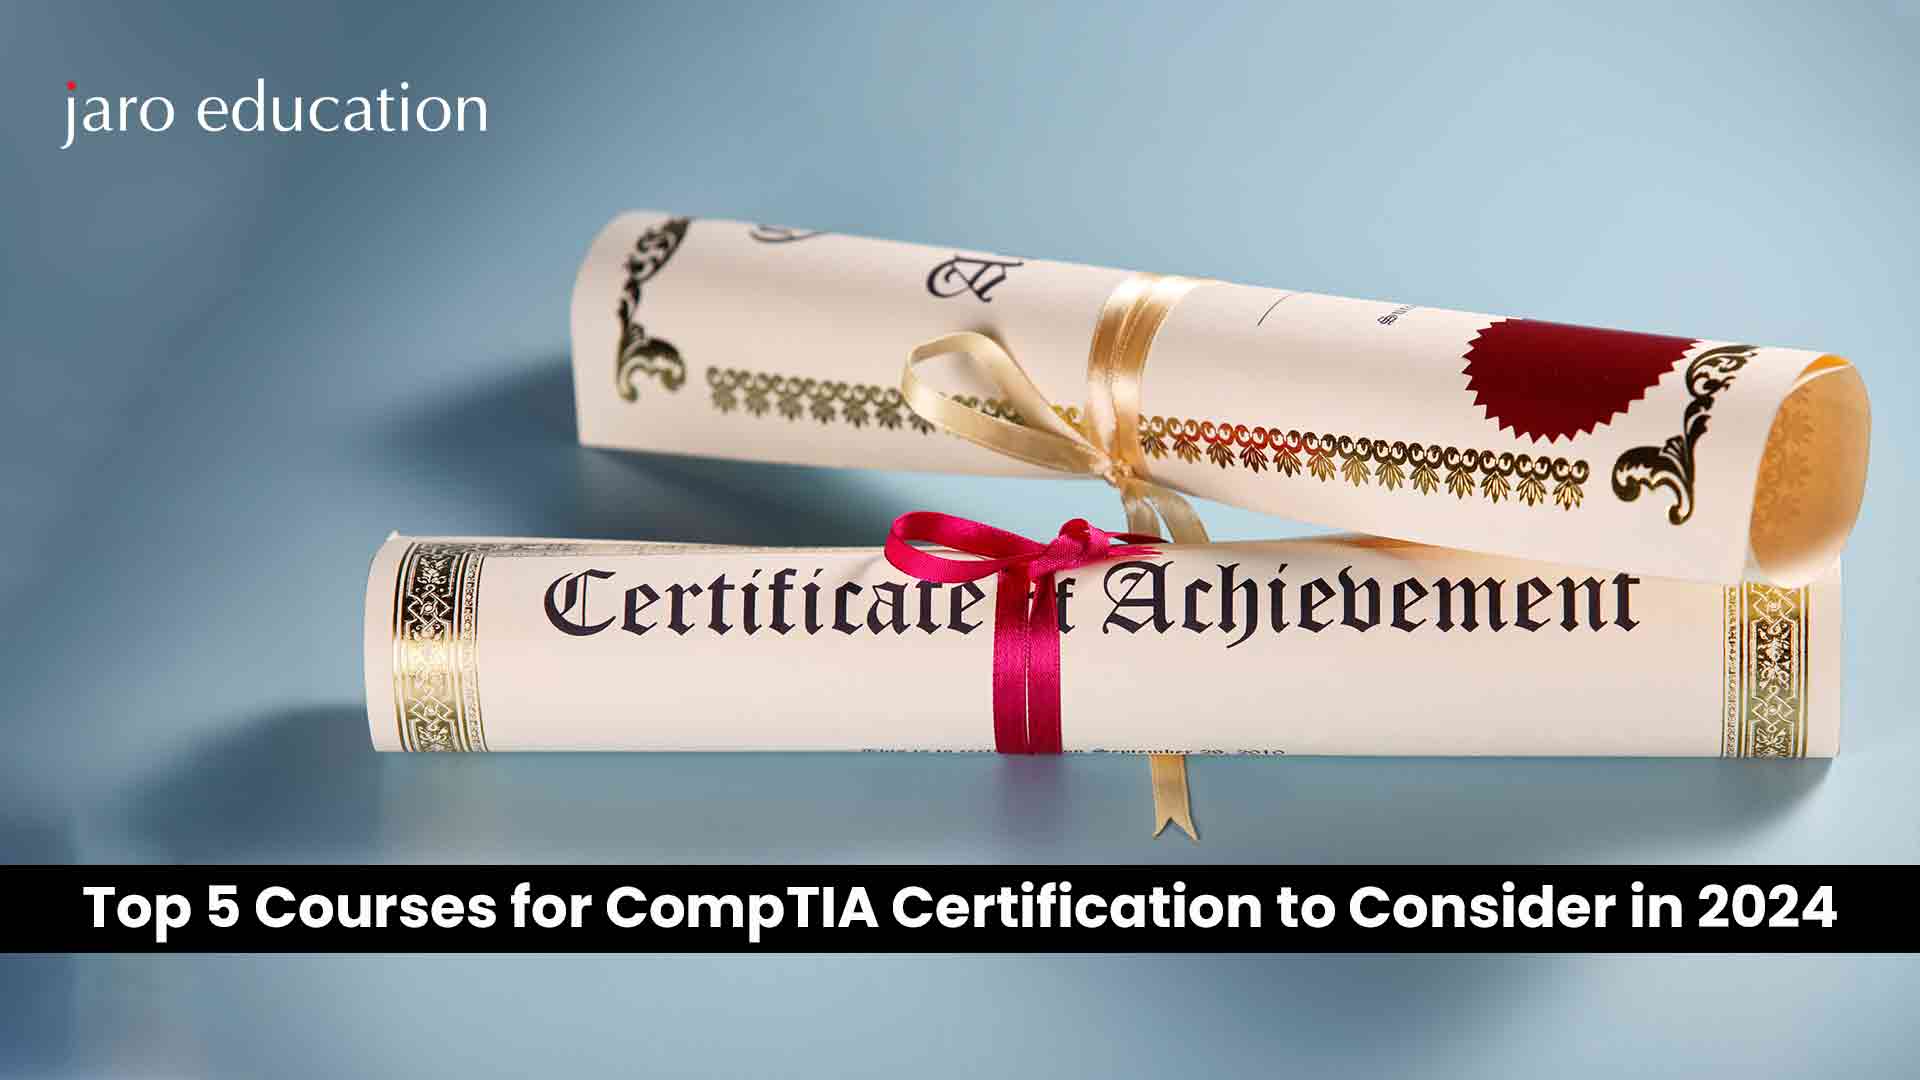 Top-5-Courses-for-CompTIA-Certification-to-Consider-in-2024